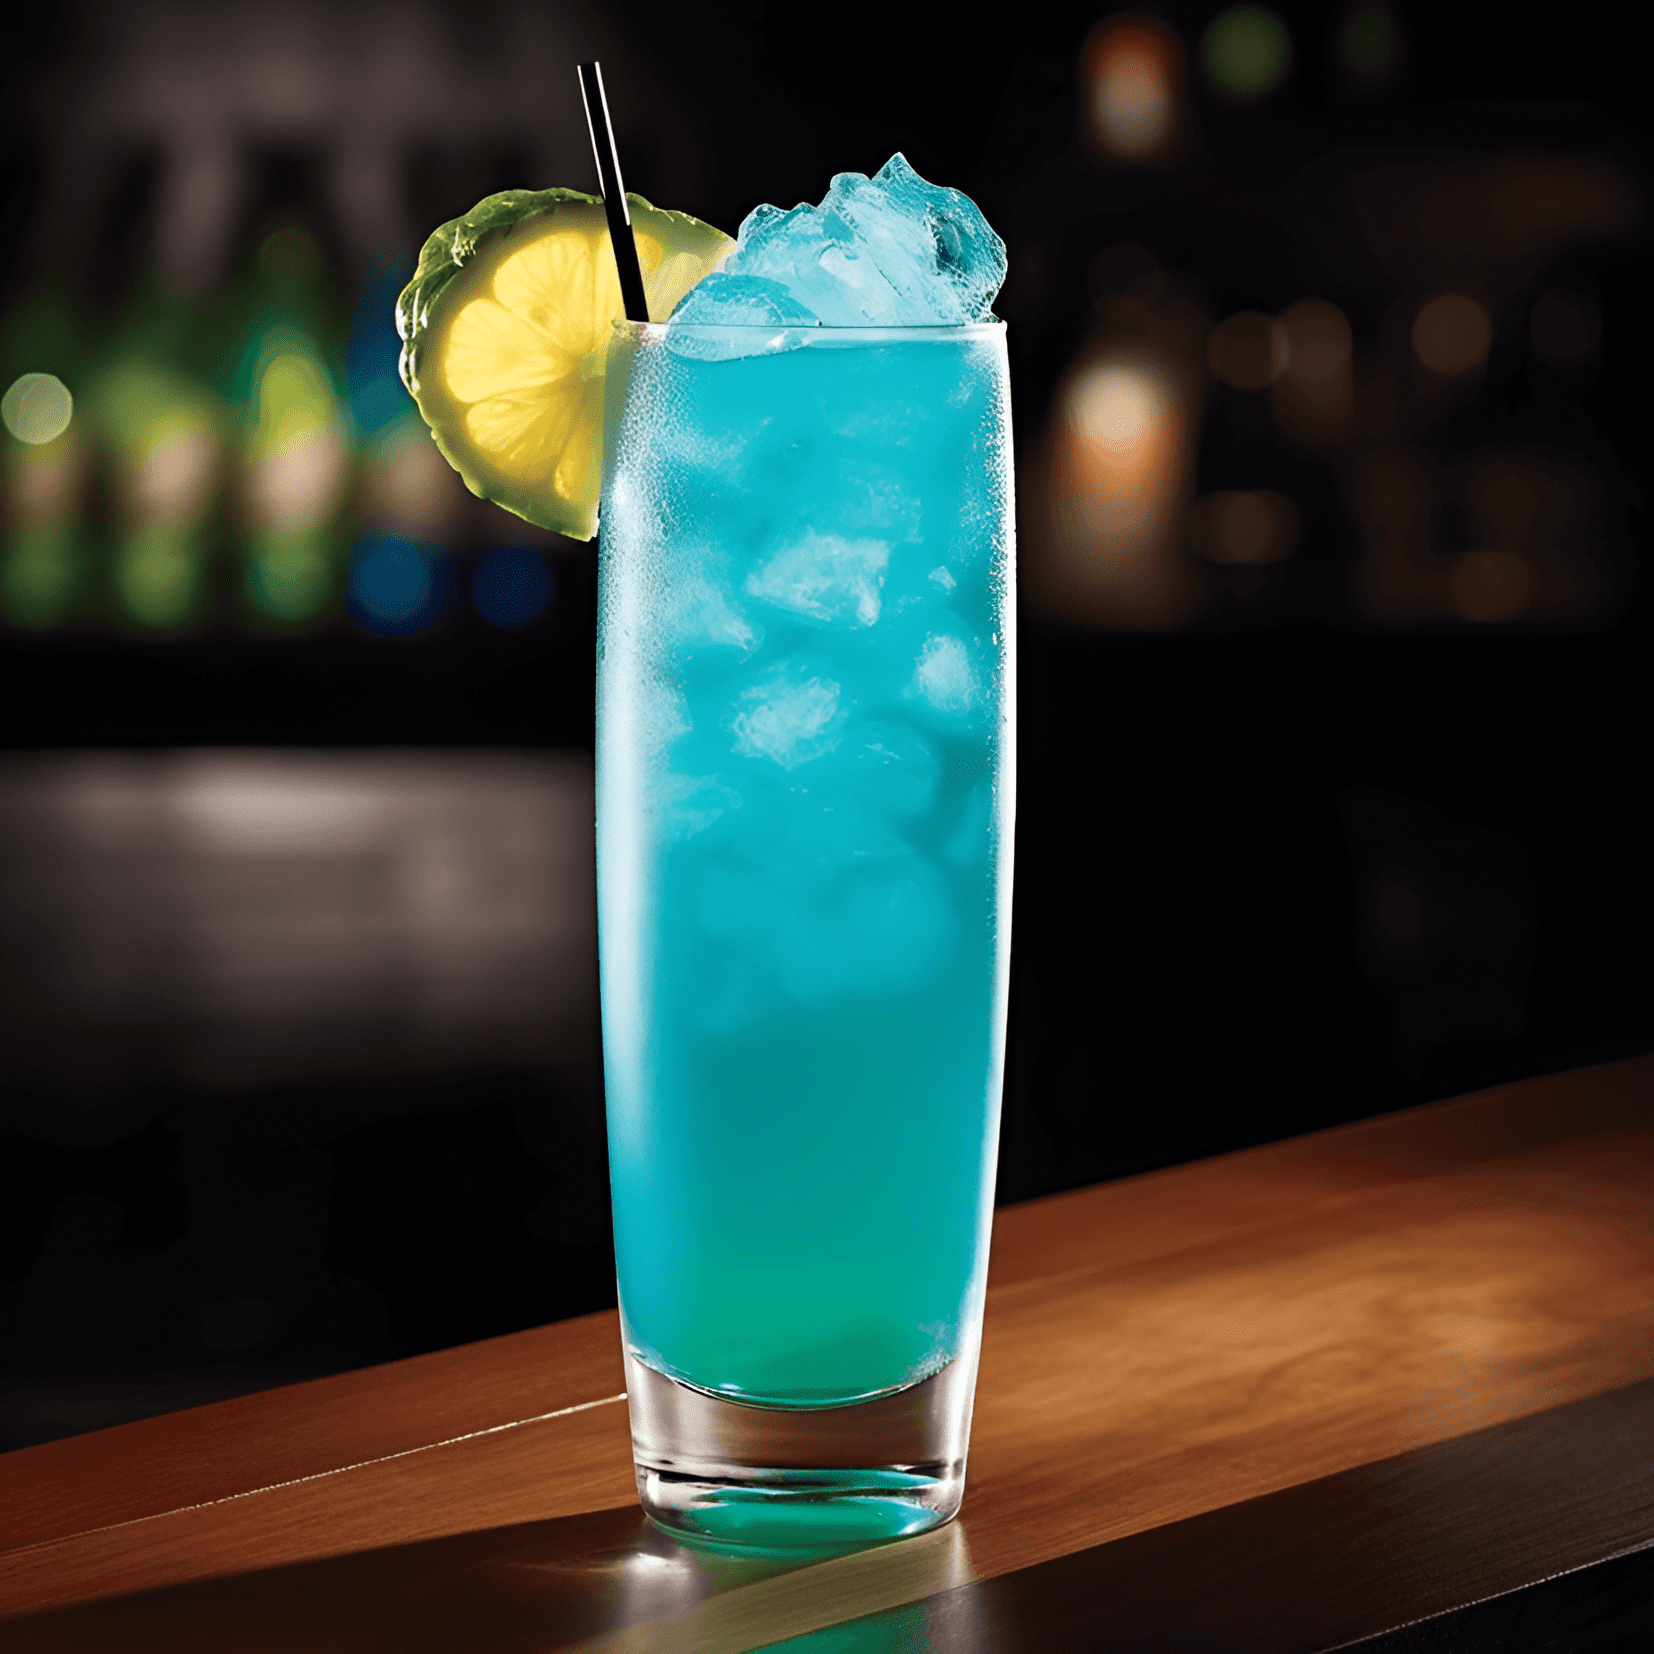 Lagoon Punch Cocktail Recipe - The Lagoon Punch has a sweet and fruity taste, with a hint of sourness from the citrus fruits. The combination of tropical flavors creates a refreshing and light drink that is perfect for sipping on a hot summer day.